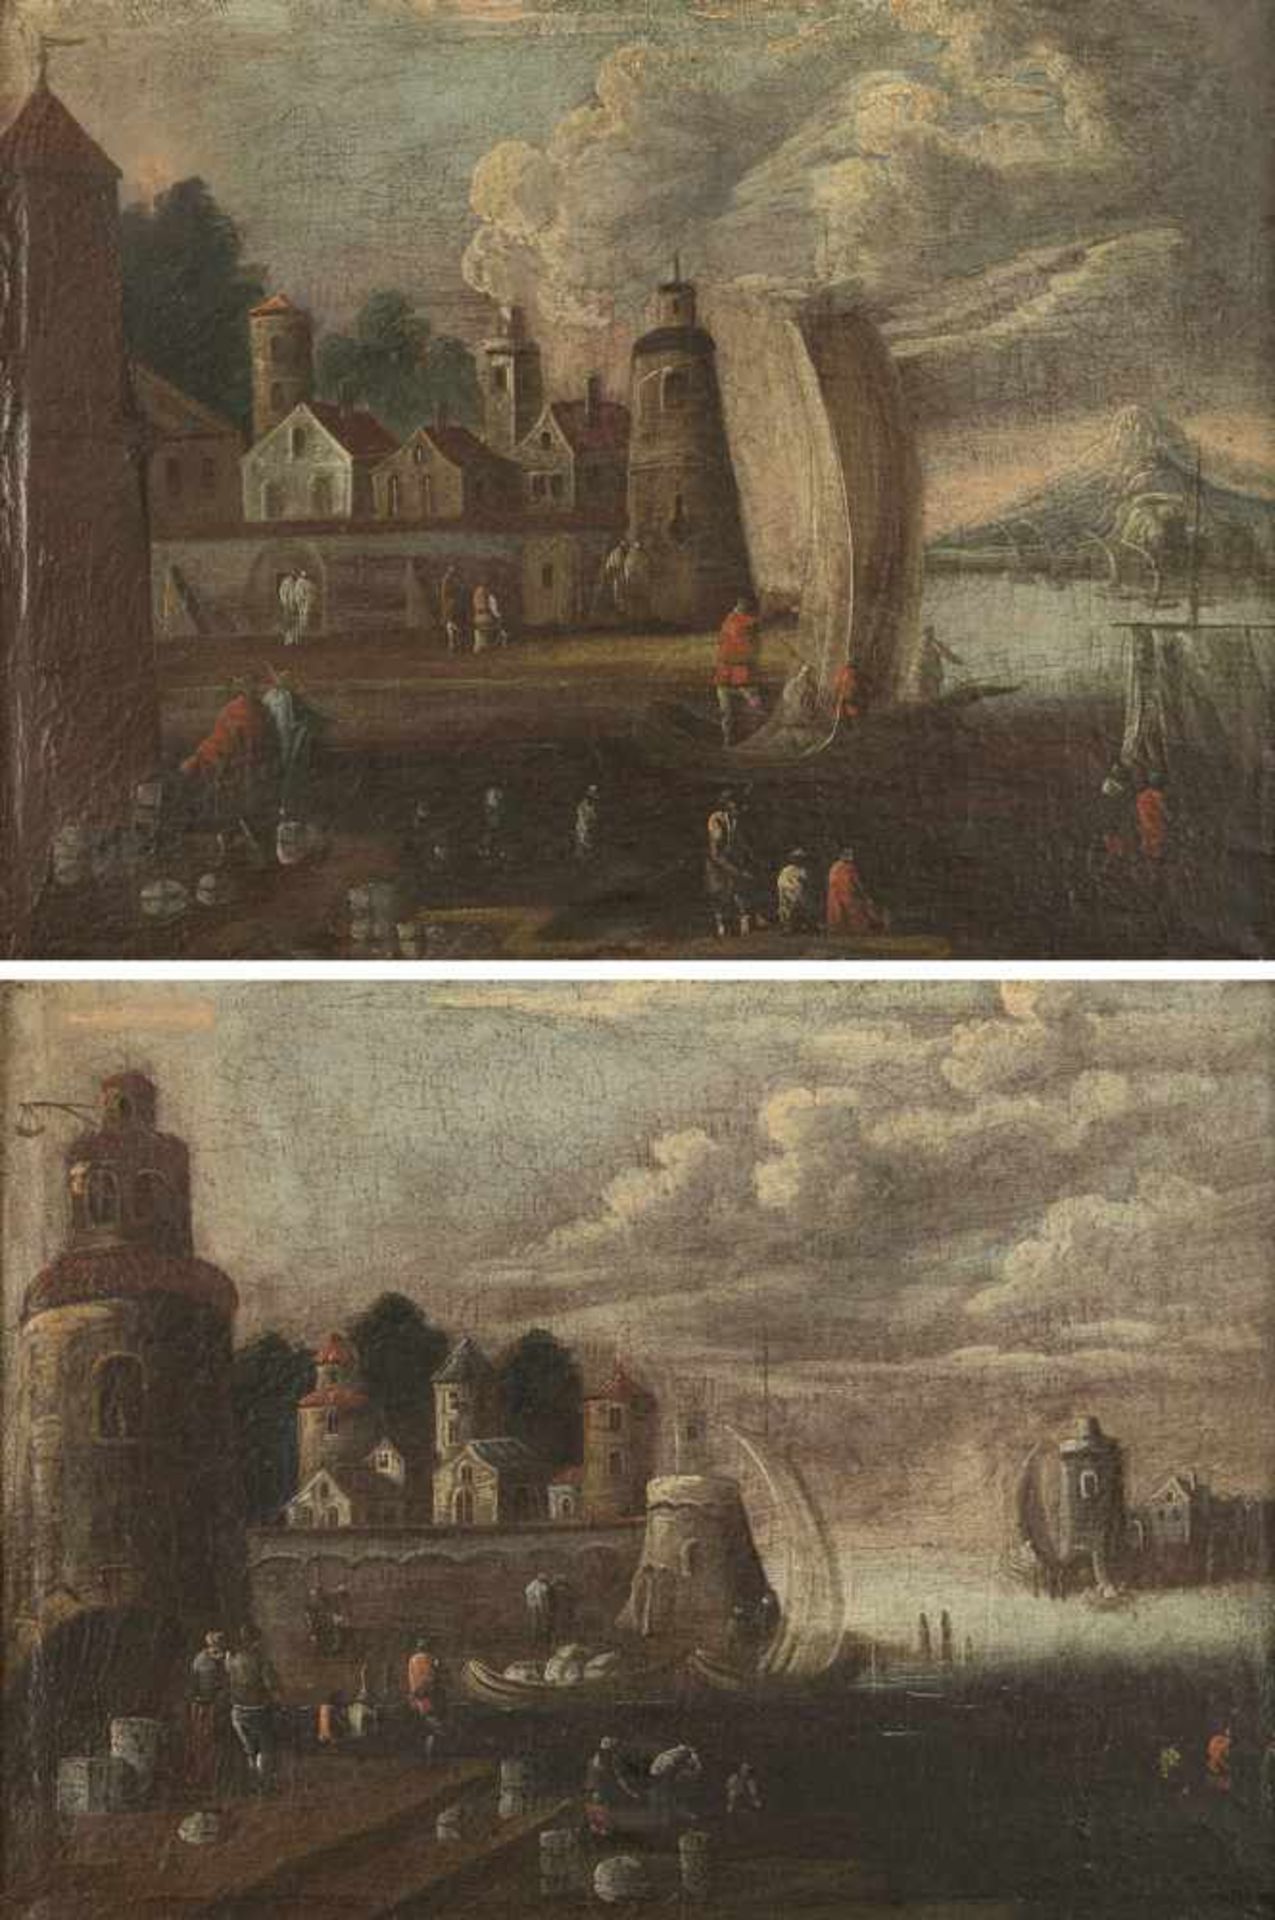 GERMANY (18th ct.). Two river landscapes with architecture, ships and merchants. Oil/canvas. Rest.